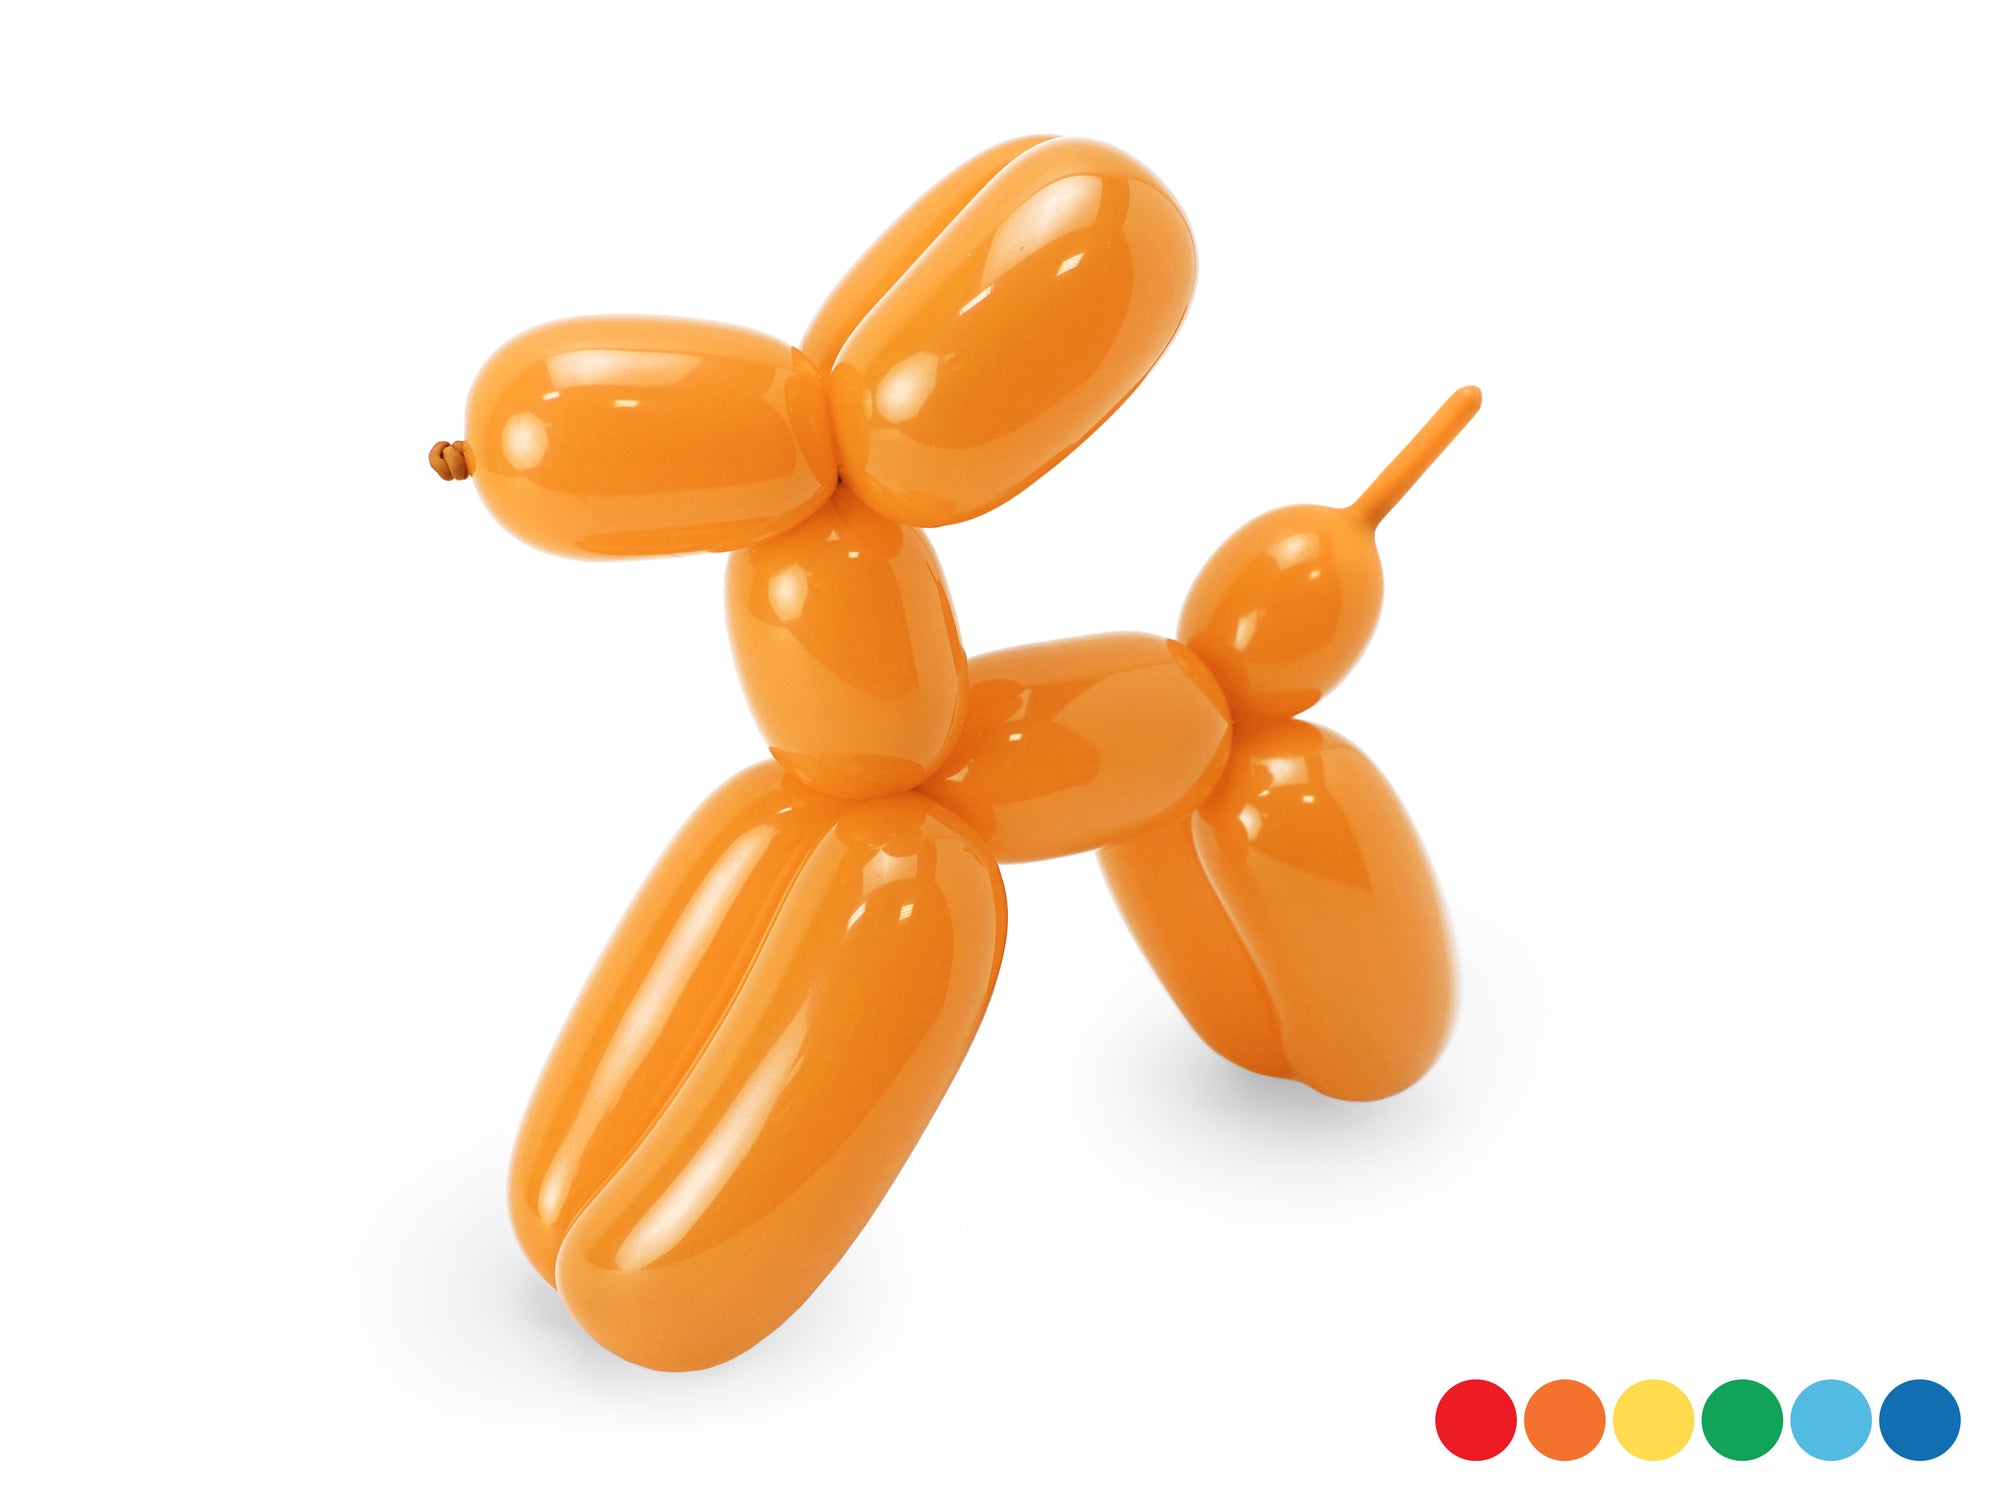 Modeling Pastel Balloons With Pump